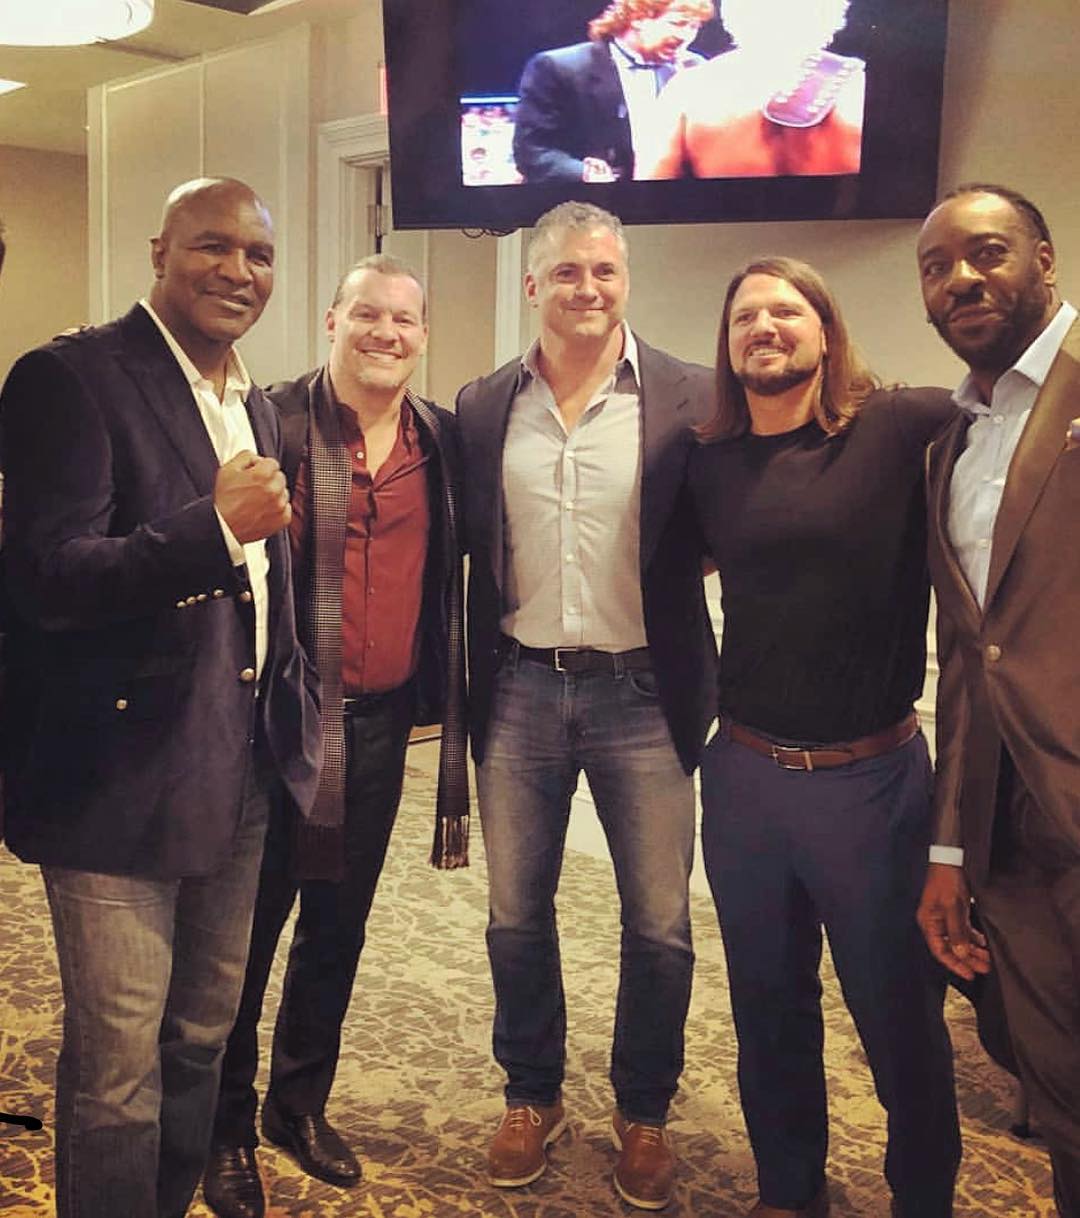 Chris Jericho Shane McMahon AJ Styles Booker T At Ric Flair's Surprise 70th Birthday Party